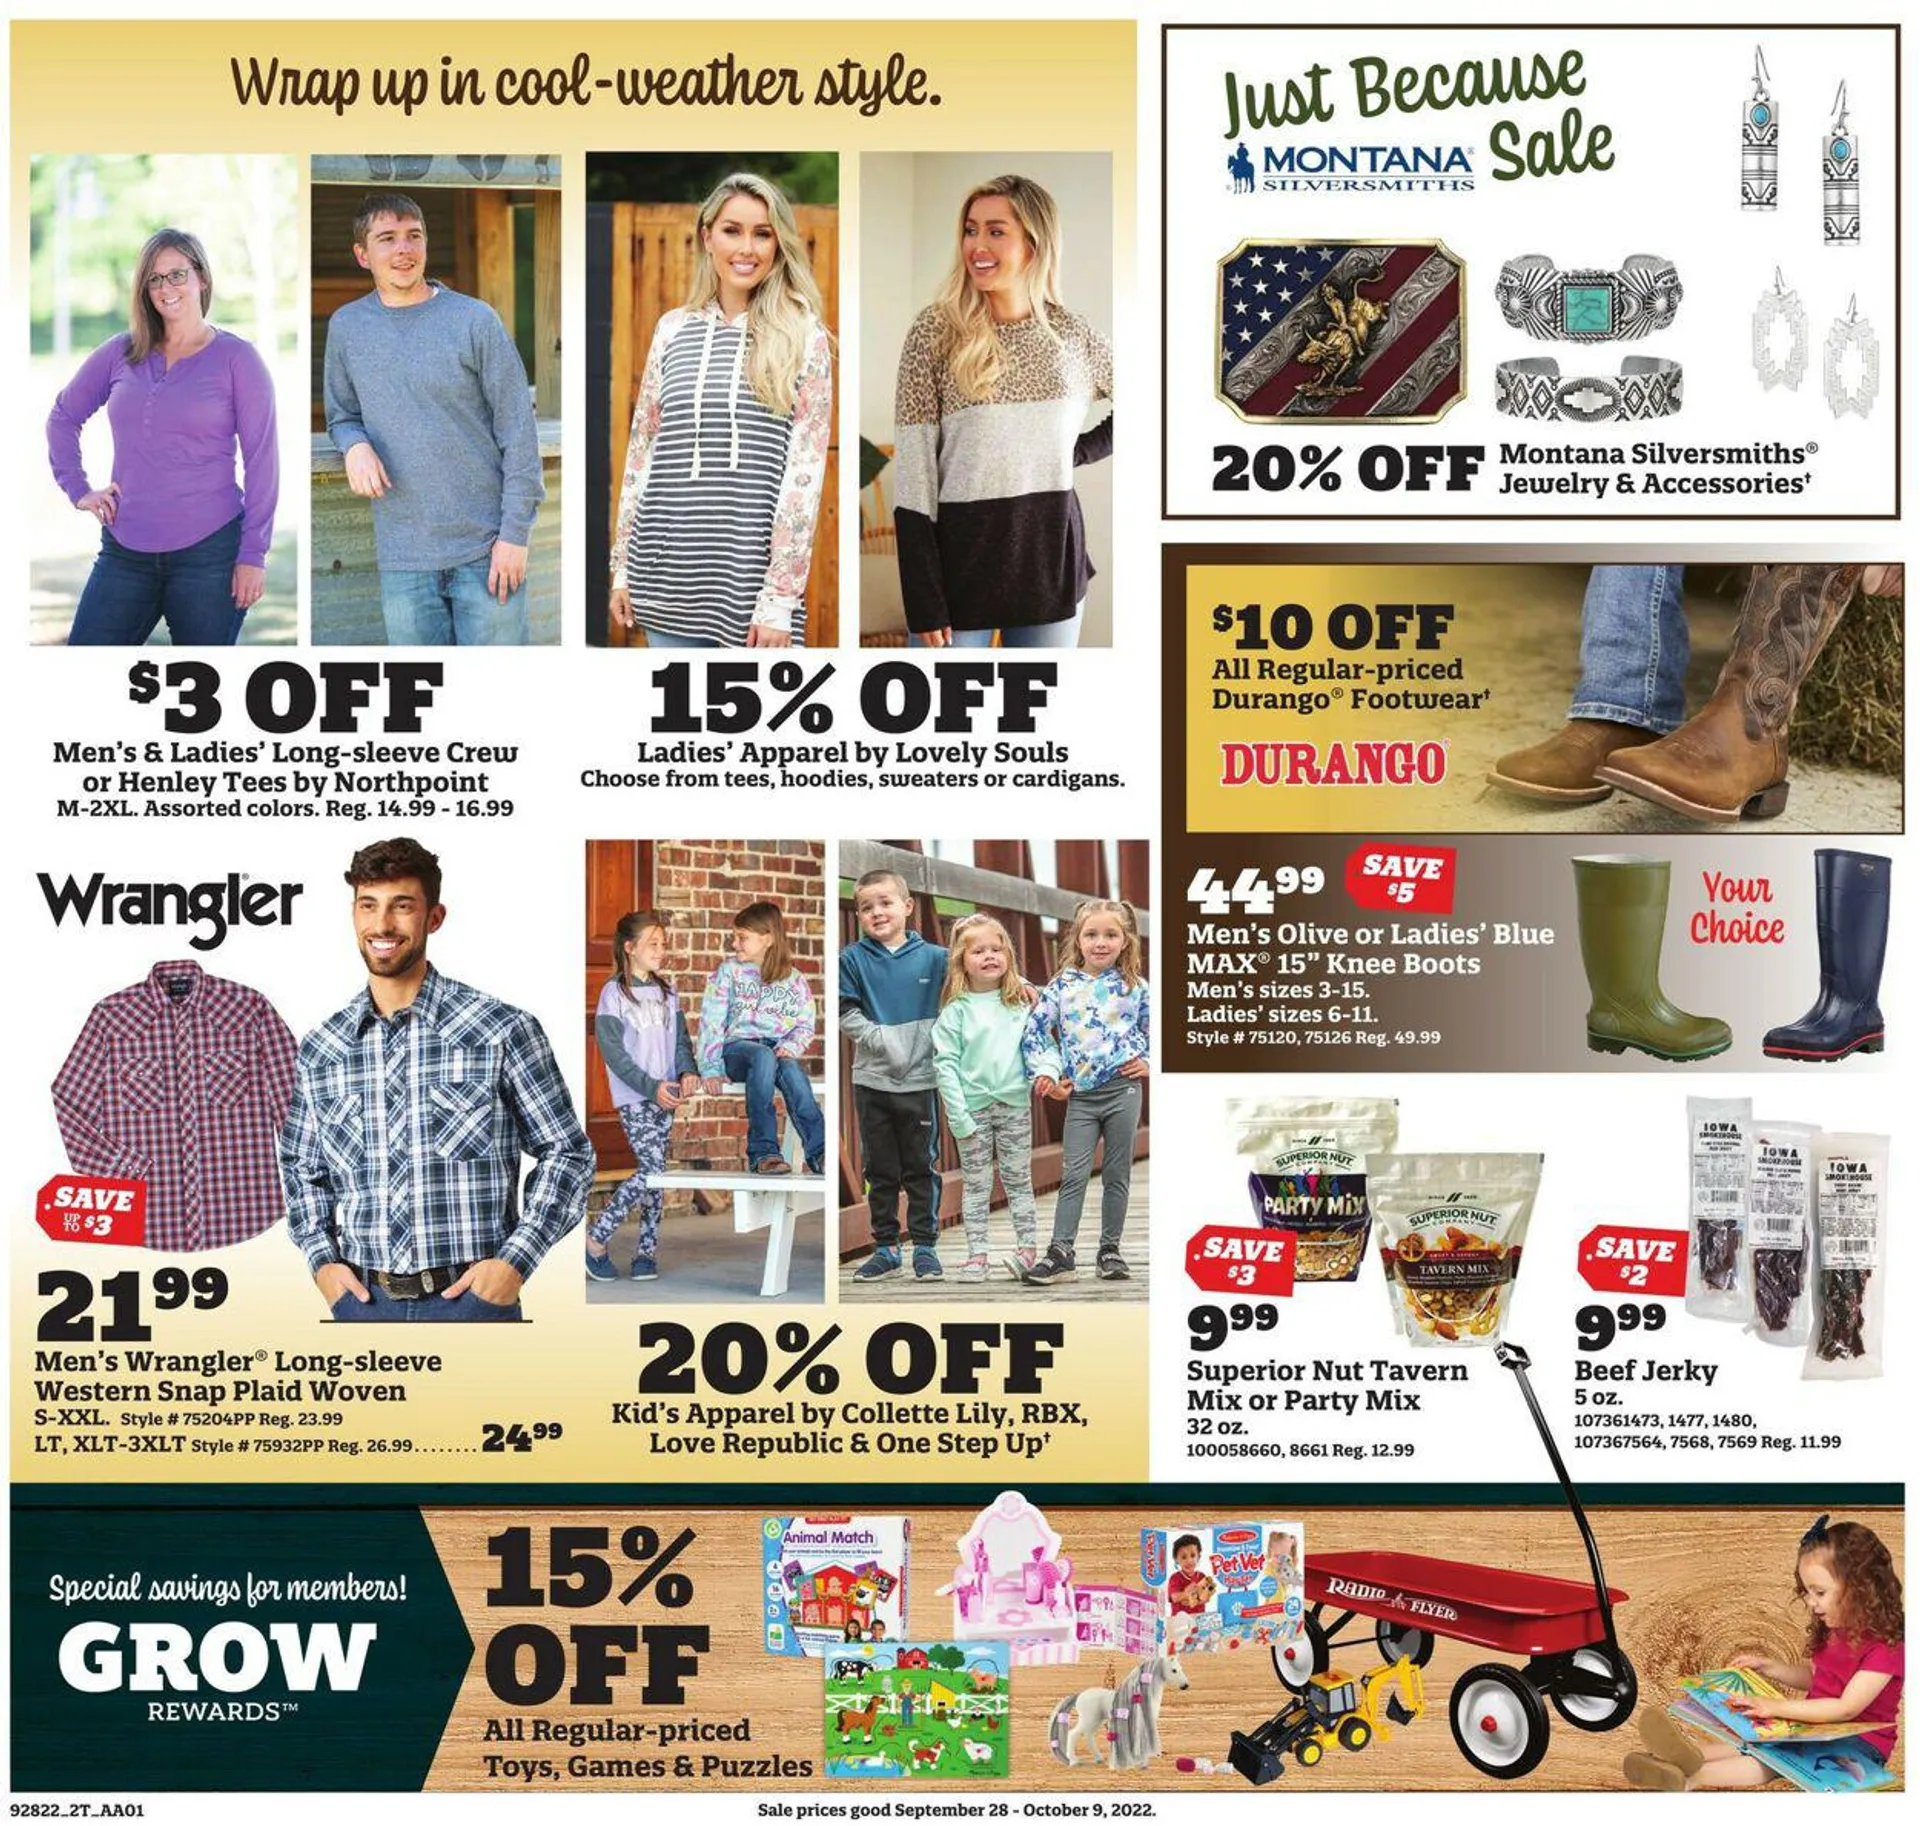 Orscheln Farm and Home Current weekly ad - 3